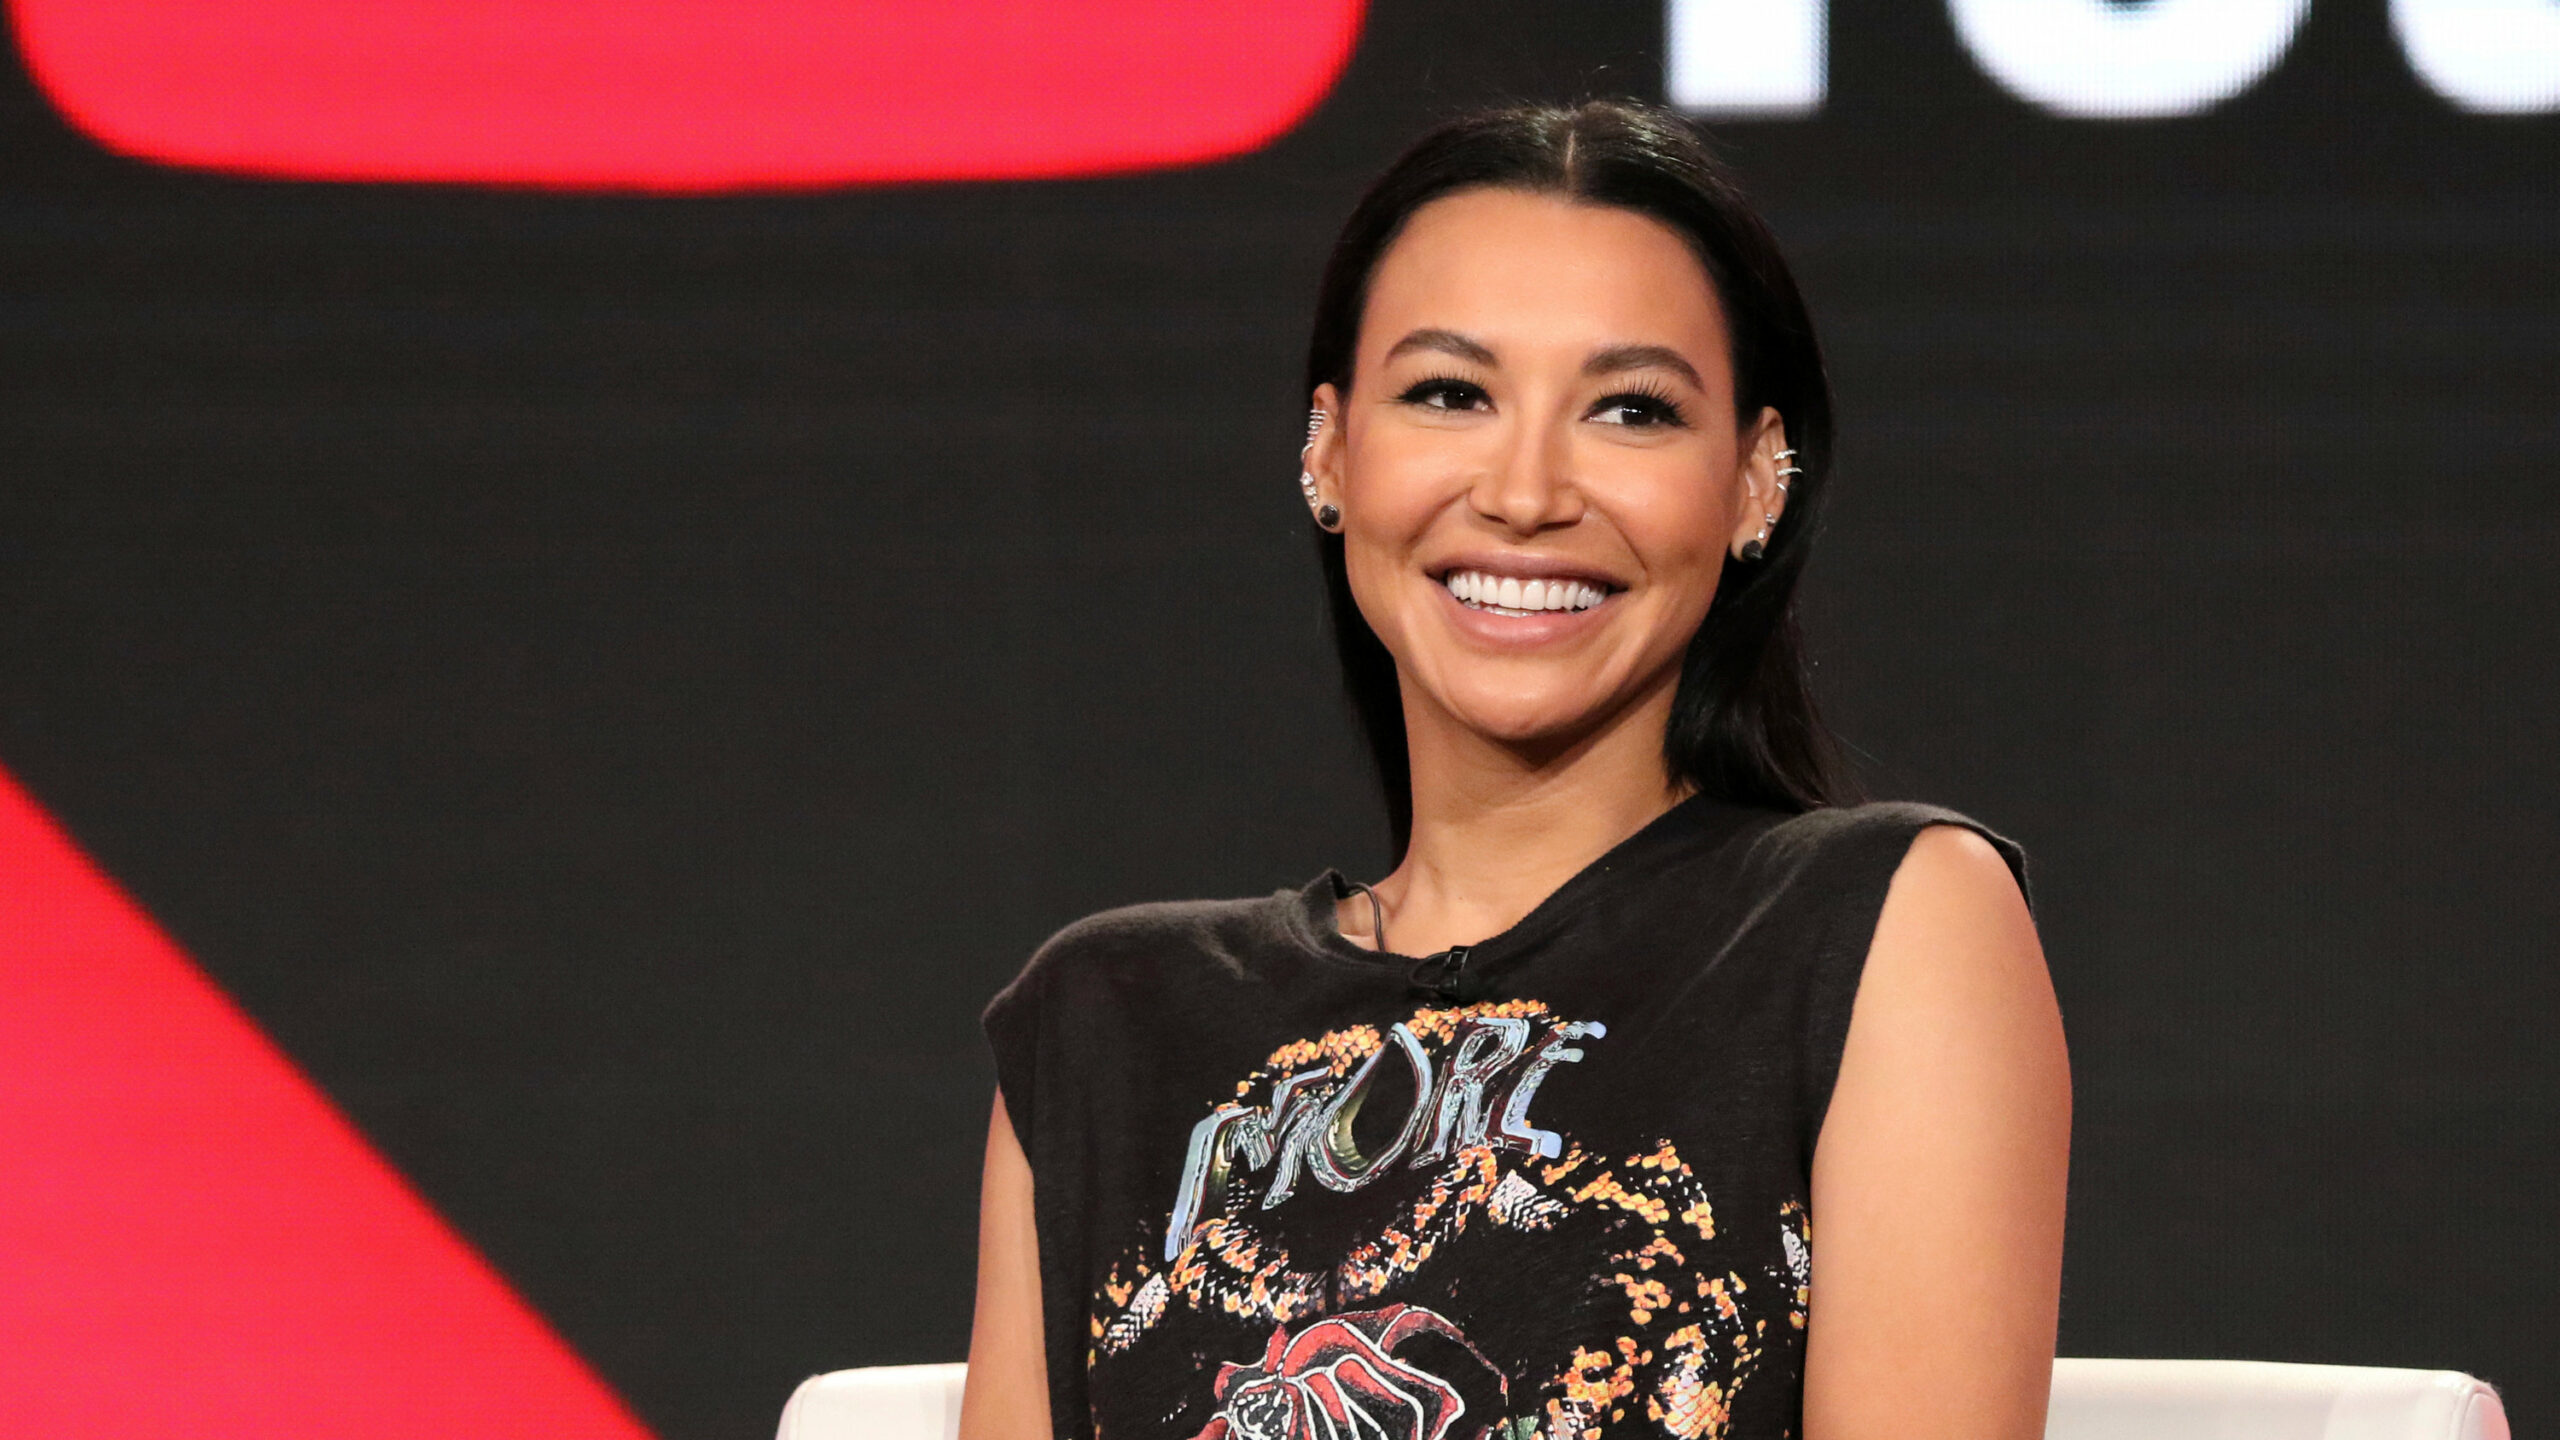 Naya Rivera's Death Ruled Accidental Drowning - The New York Times